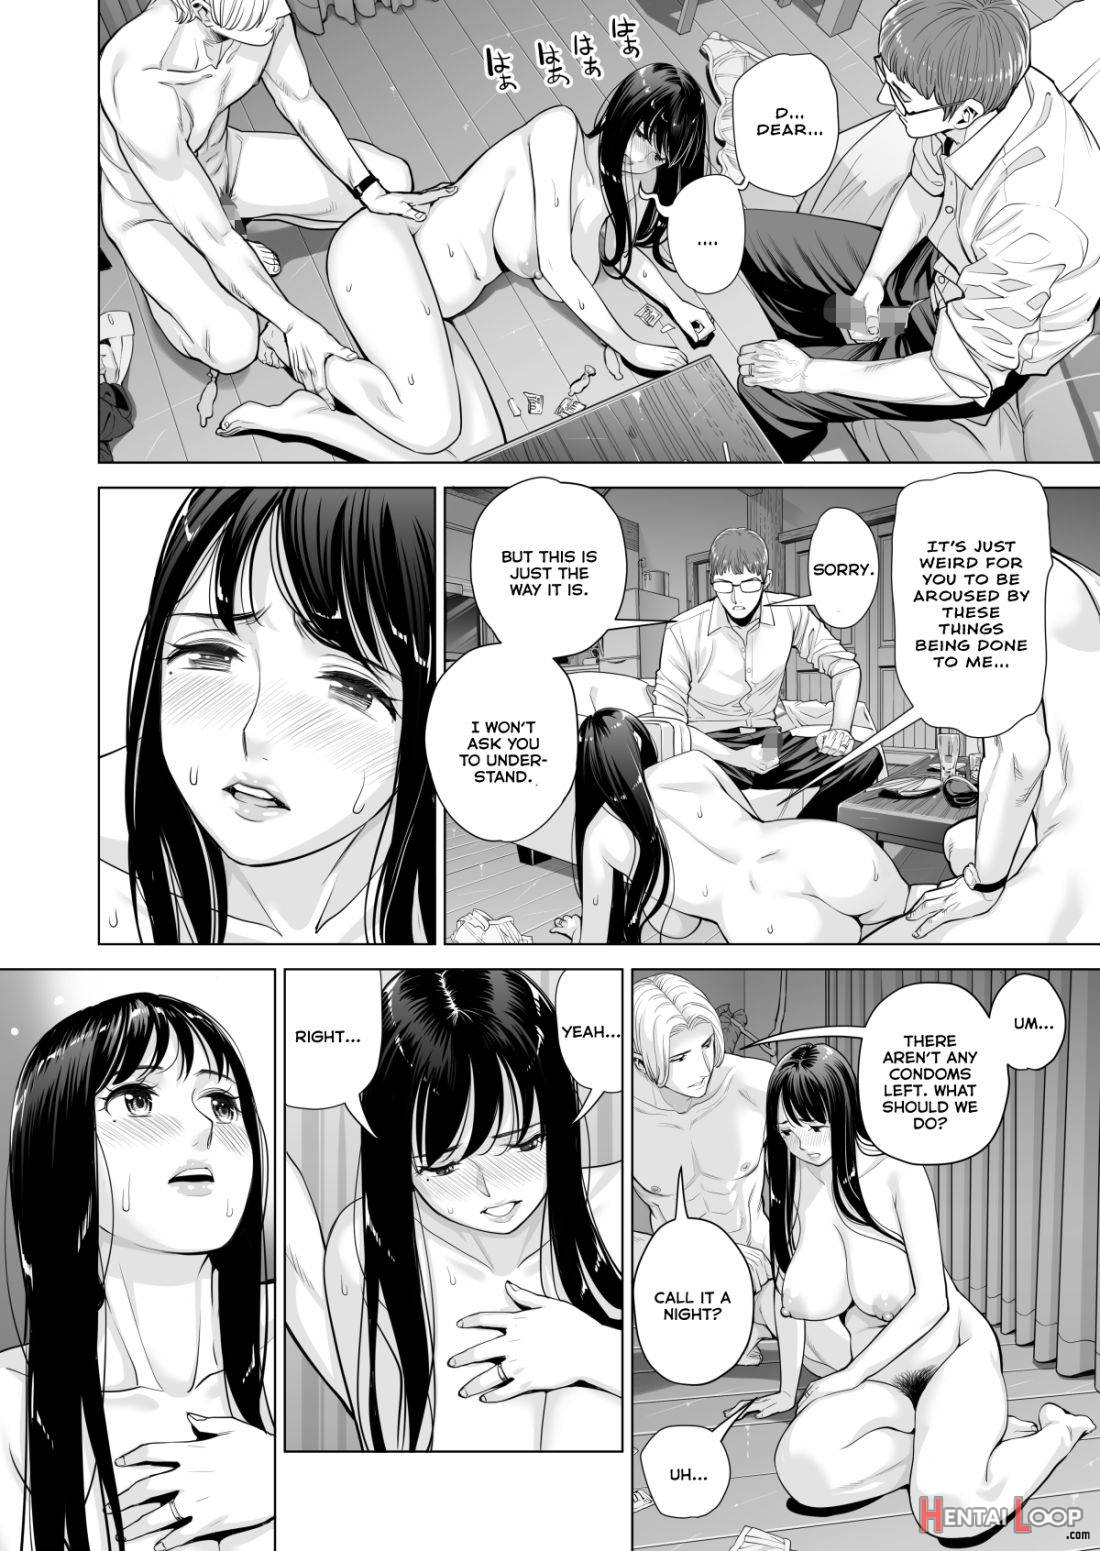 Tsukiyo no Midare Zake (Kouhen) Moonlit Intoxication ~ A Housewife Stolen by a Coworker Besides her Blackout Drunk Husband ~ Chapter 2 page 50